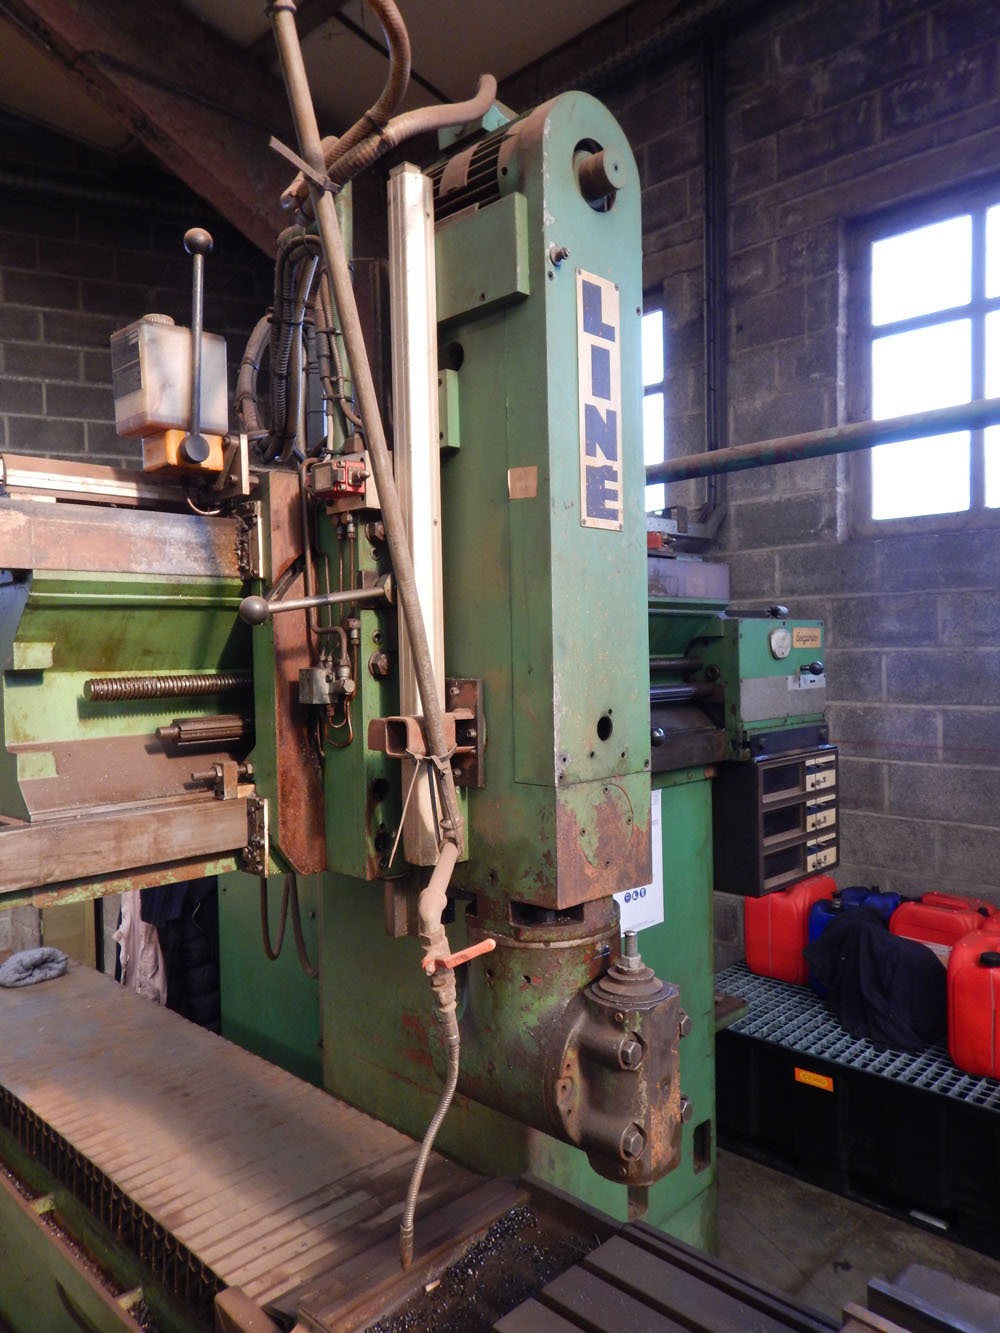 Liné-GSP, plano milling/grinding